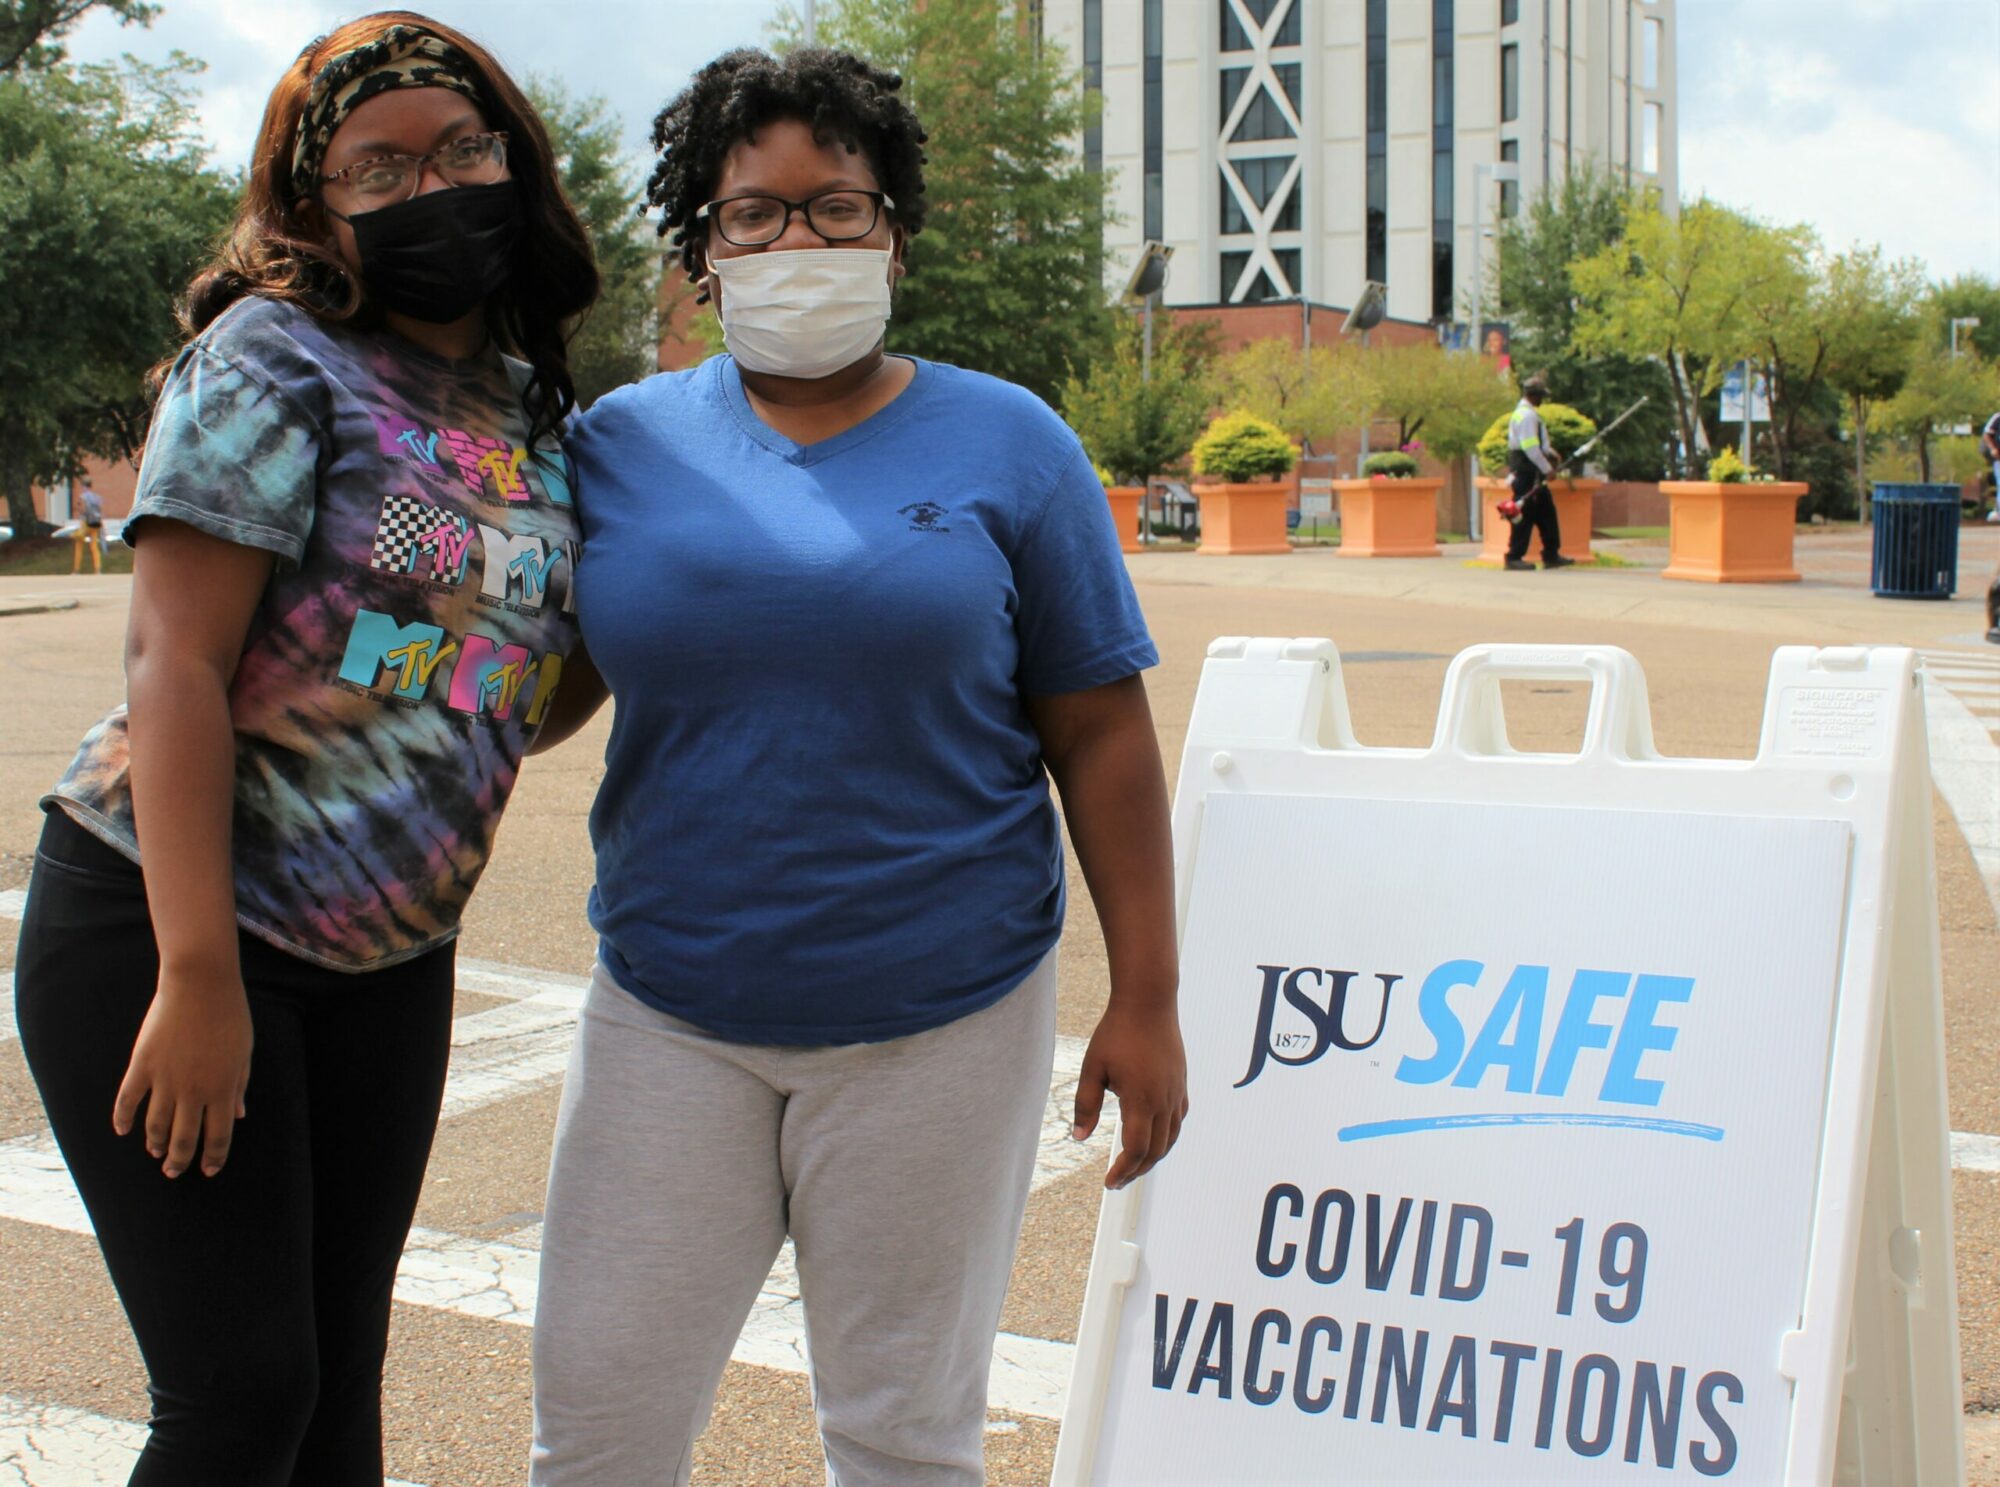 Sisters Camille and Atlantis Crosland attended Jackson State University's free COVID-19 vaccination event to take the shot.